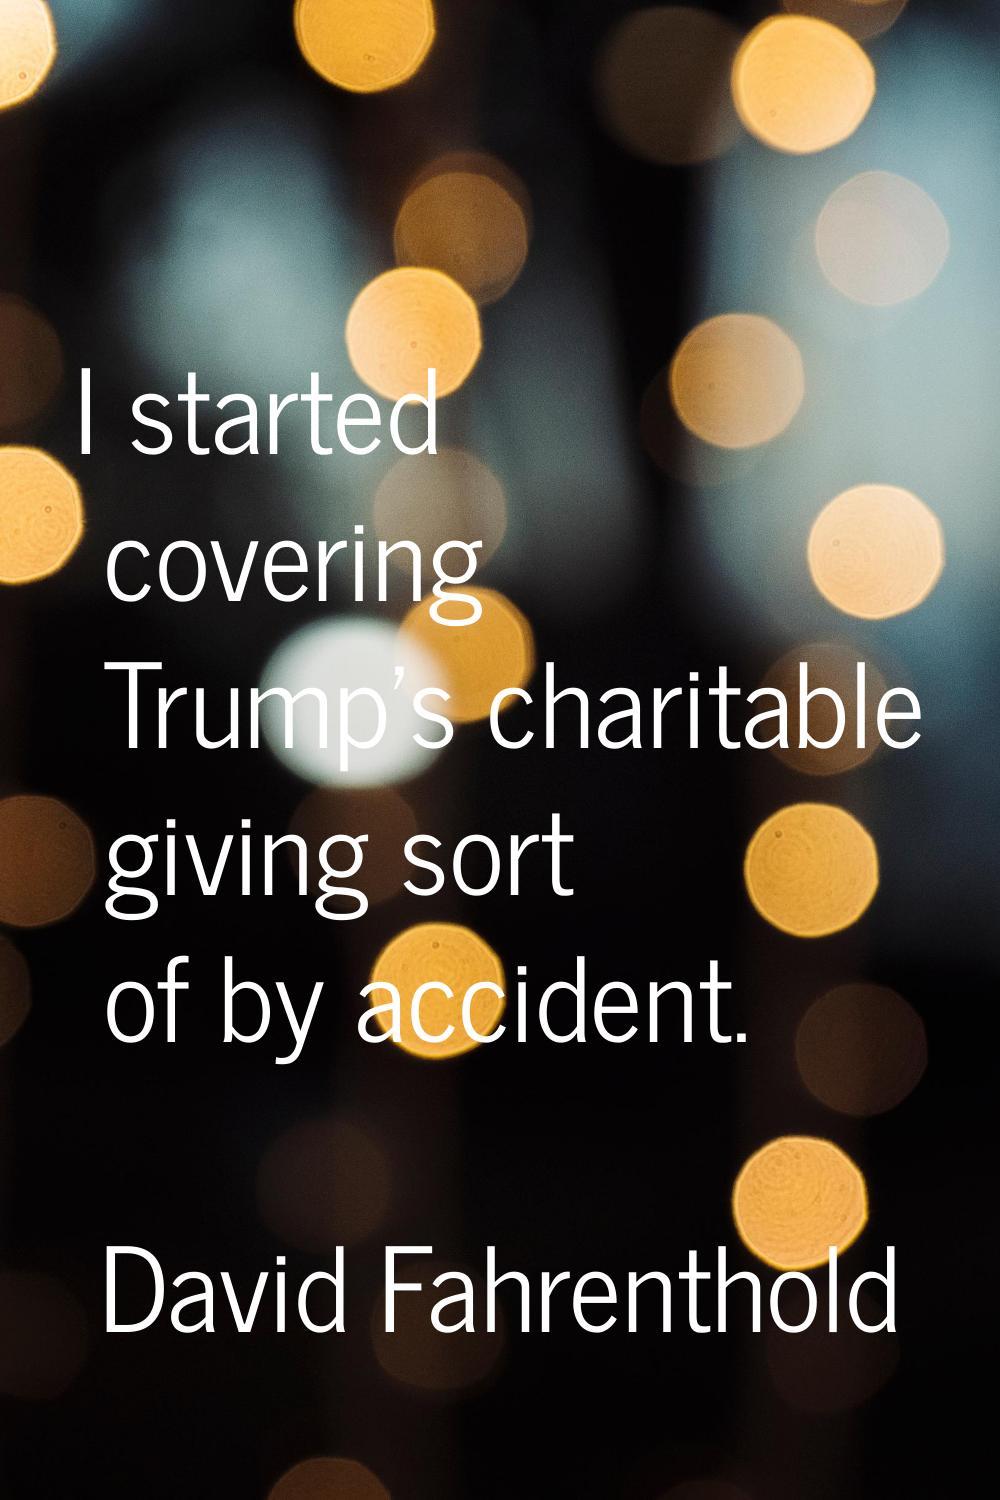 I started covering Trump's charitable giving sort of by accident.